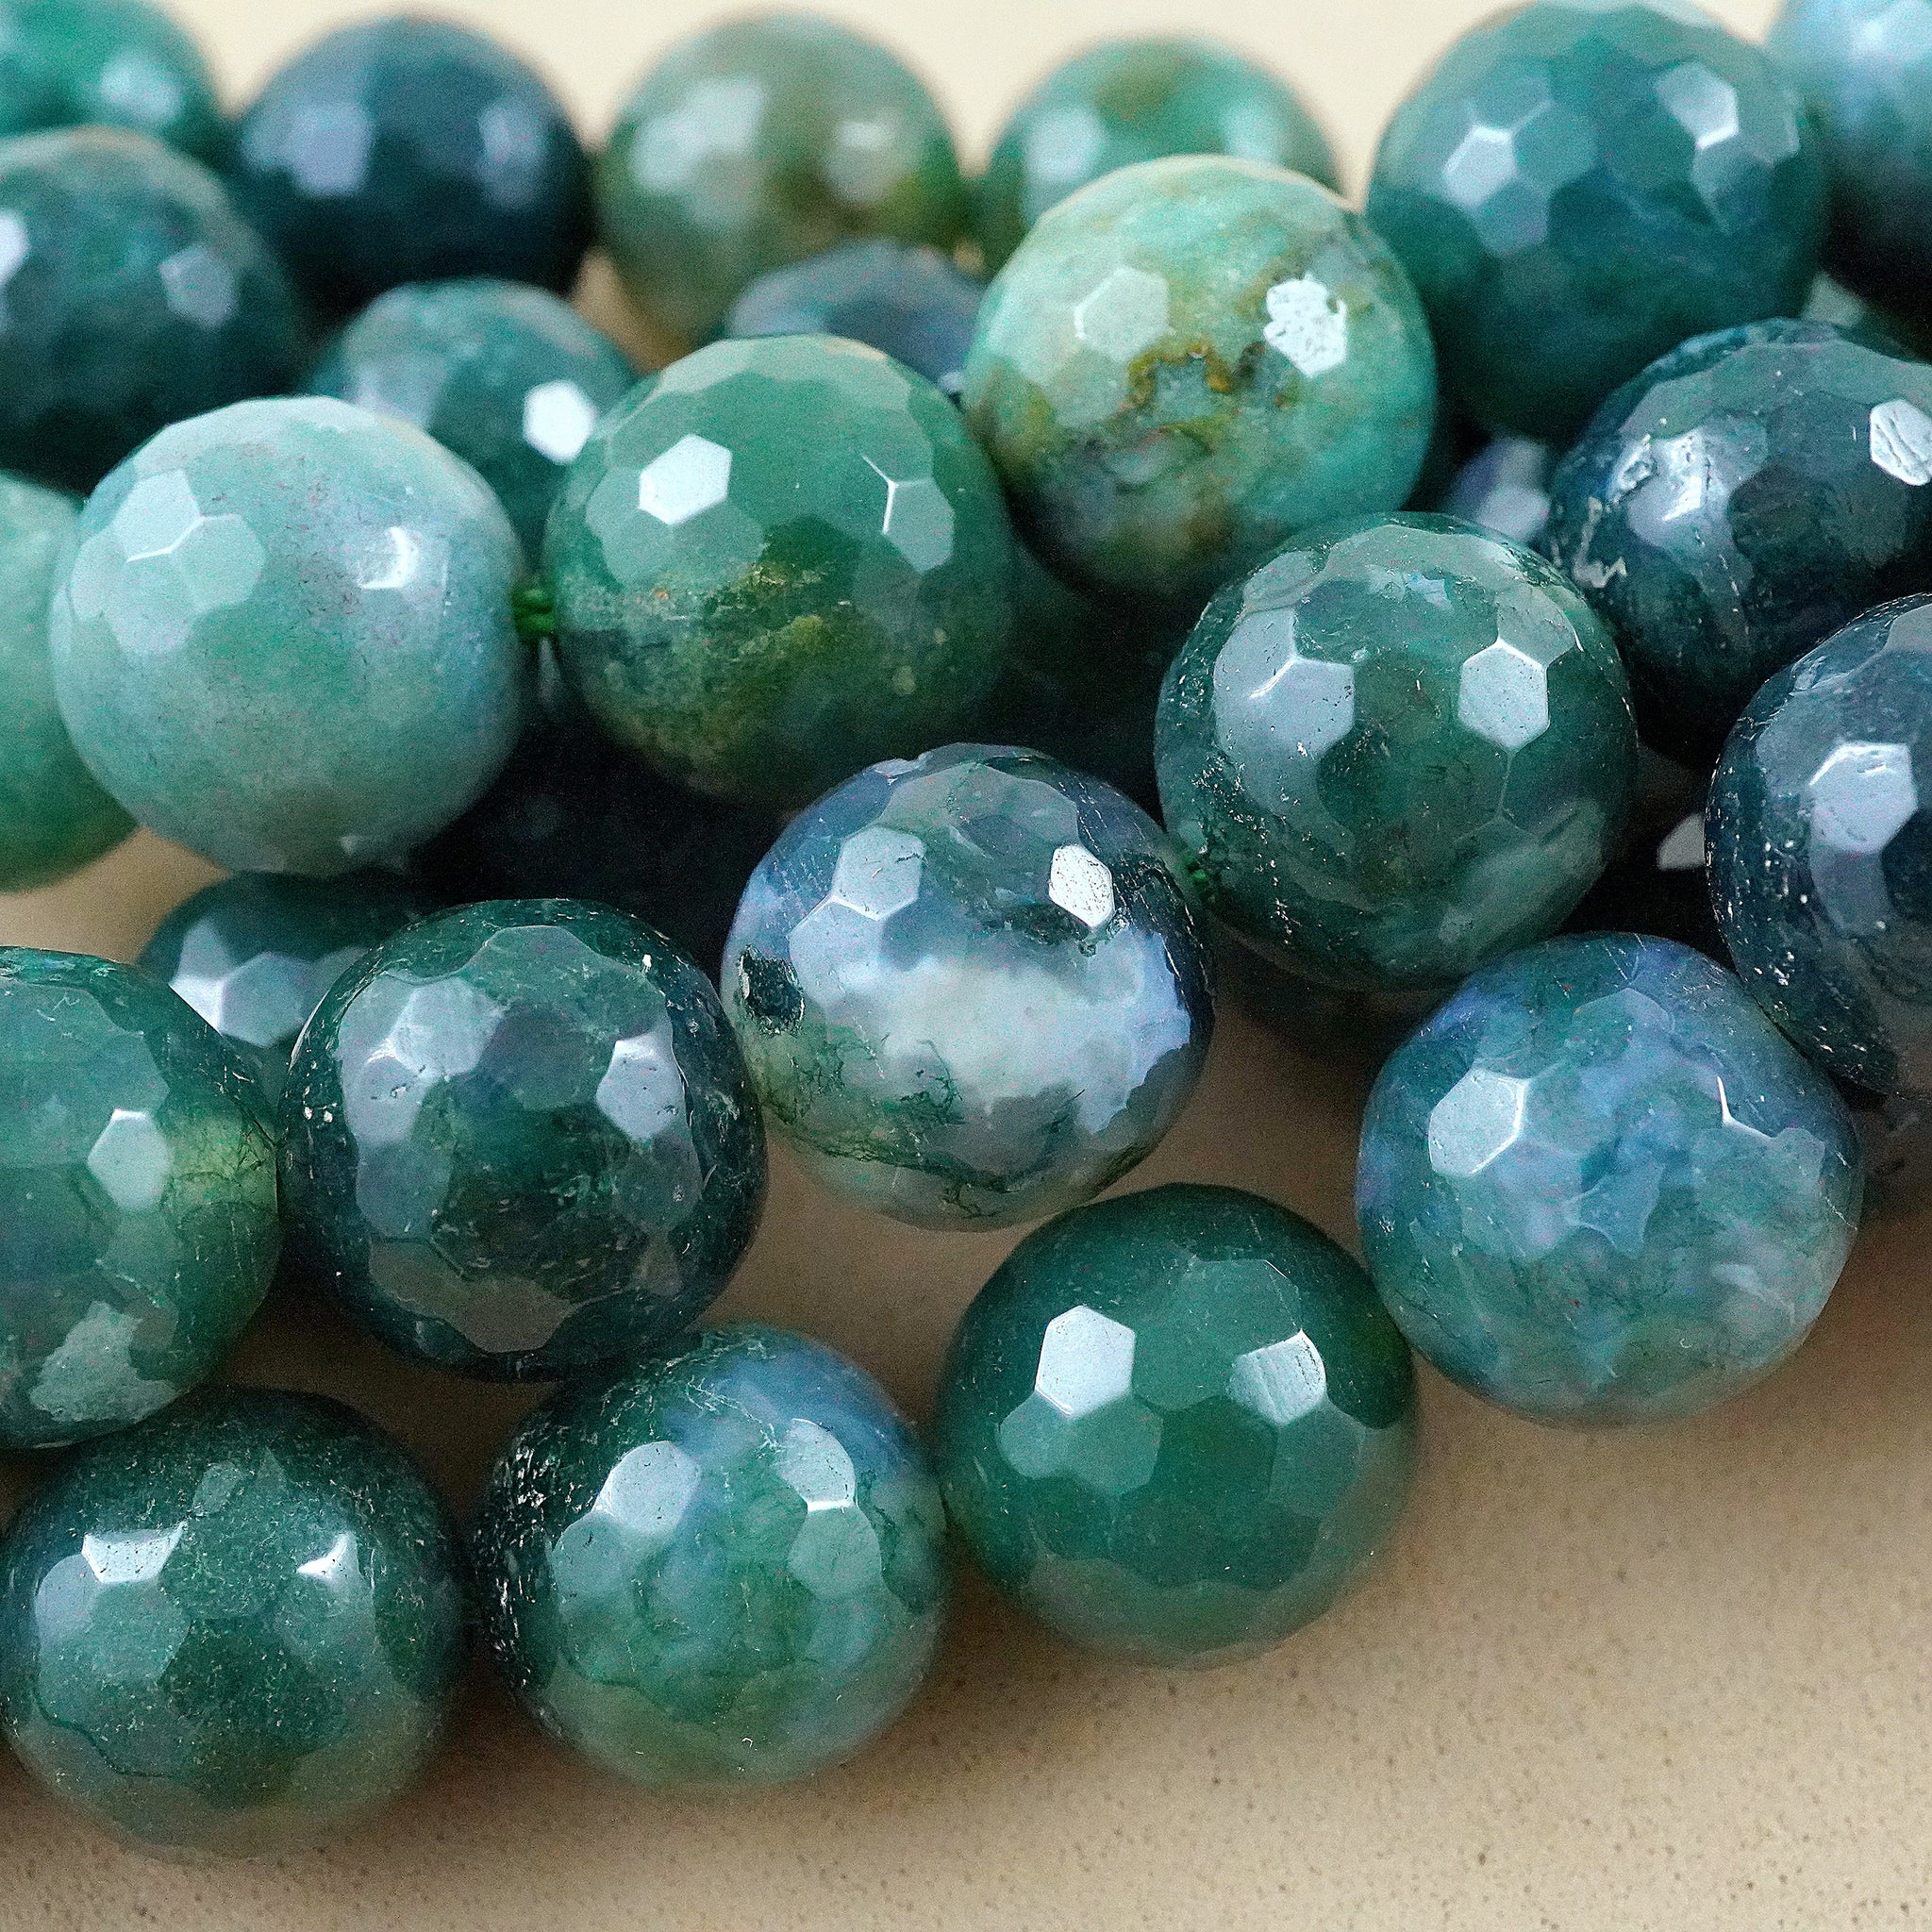 12mm Smooth Round, Jade Green Agate Beads (16 Strand)